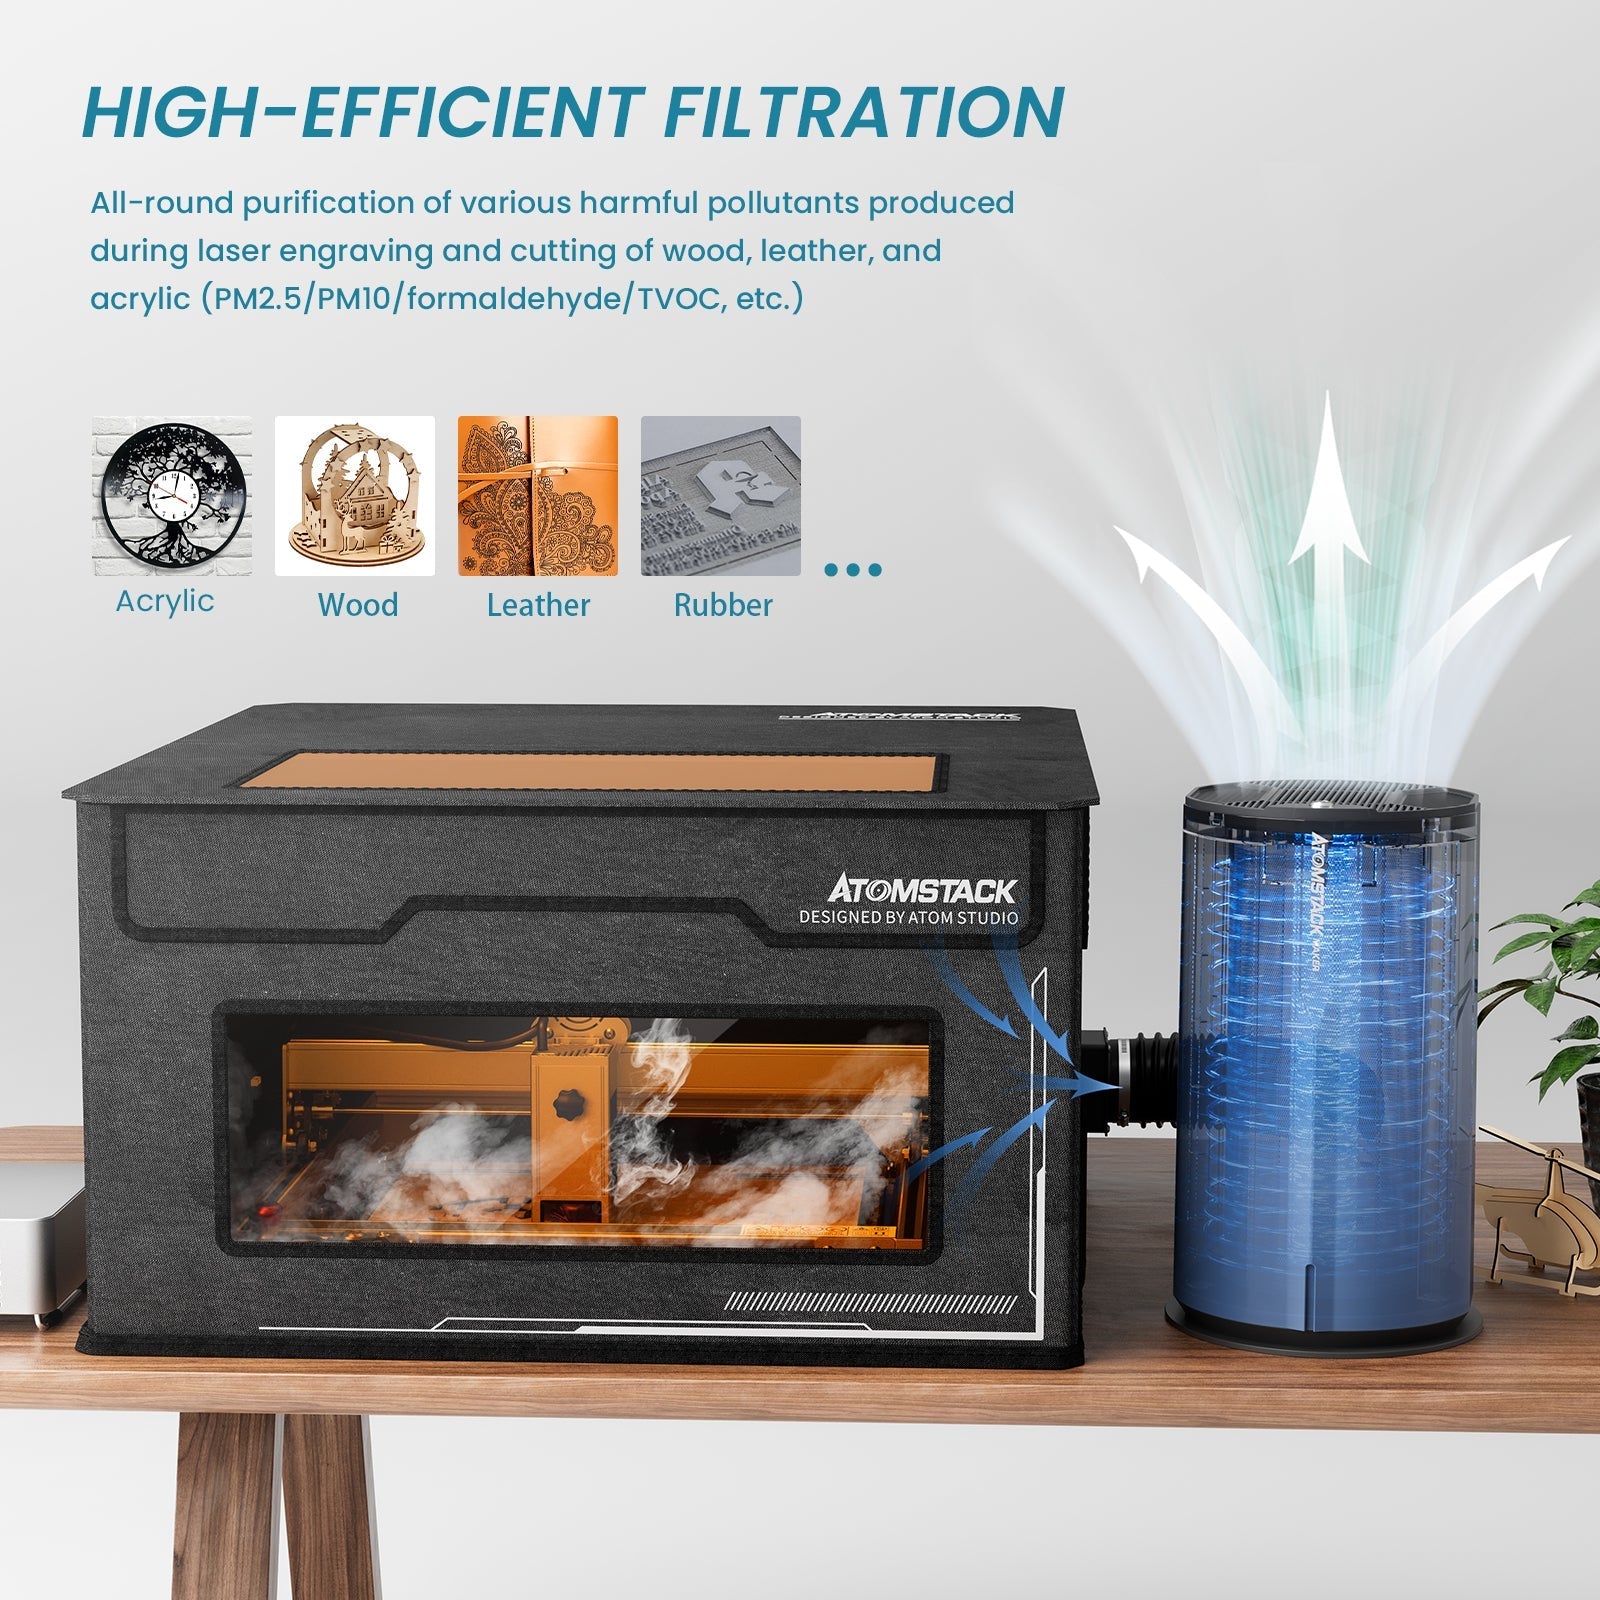 AtomStack D2 Air Purifier for Laser Engraver and Cutter With AP2 Air Purifier Filter Replacement